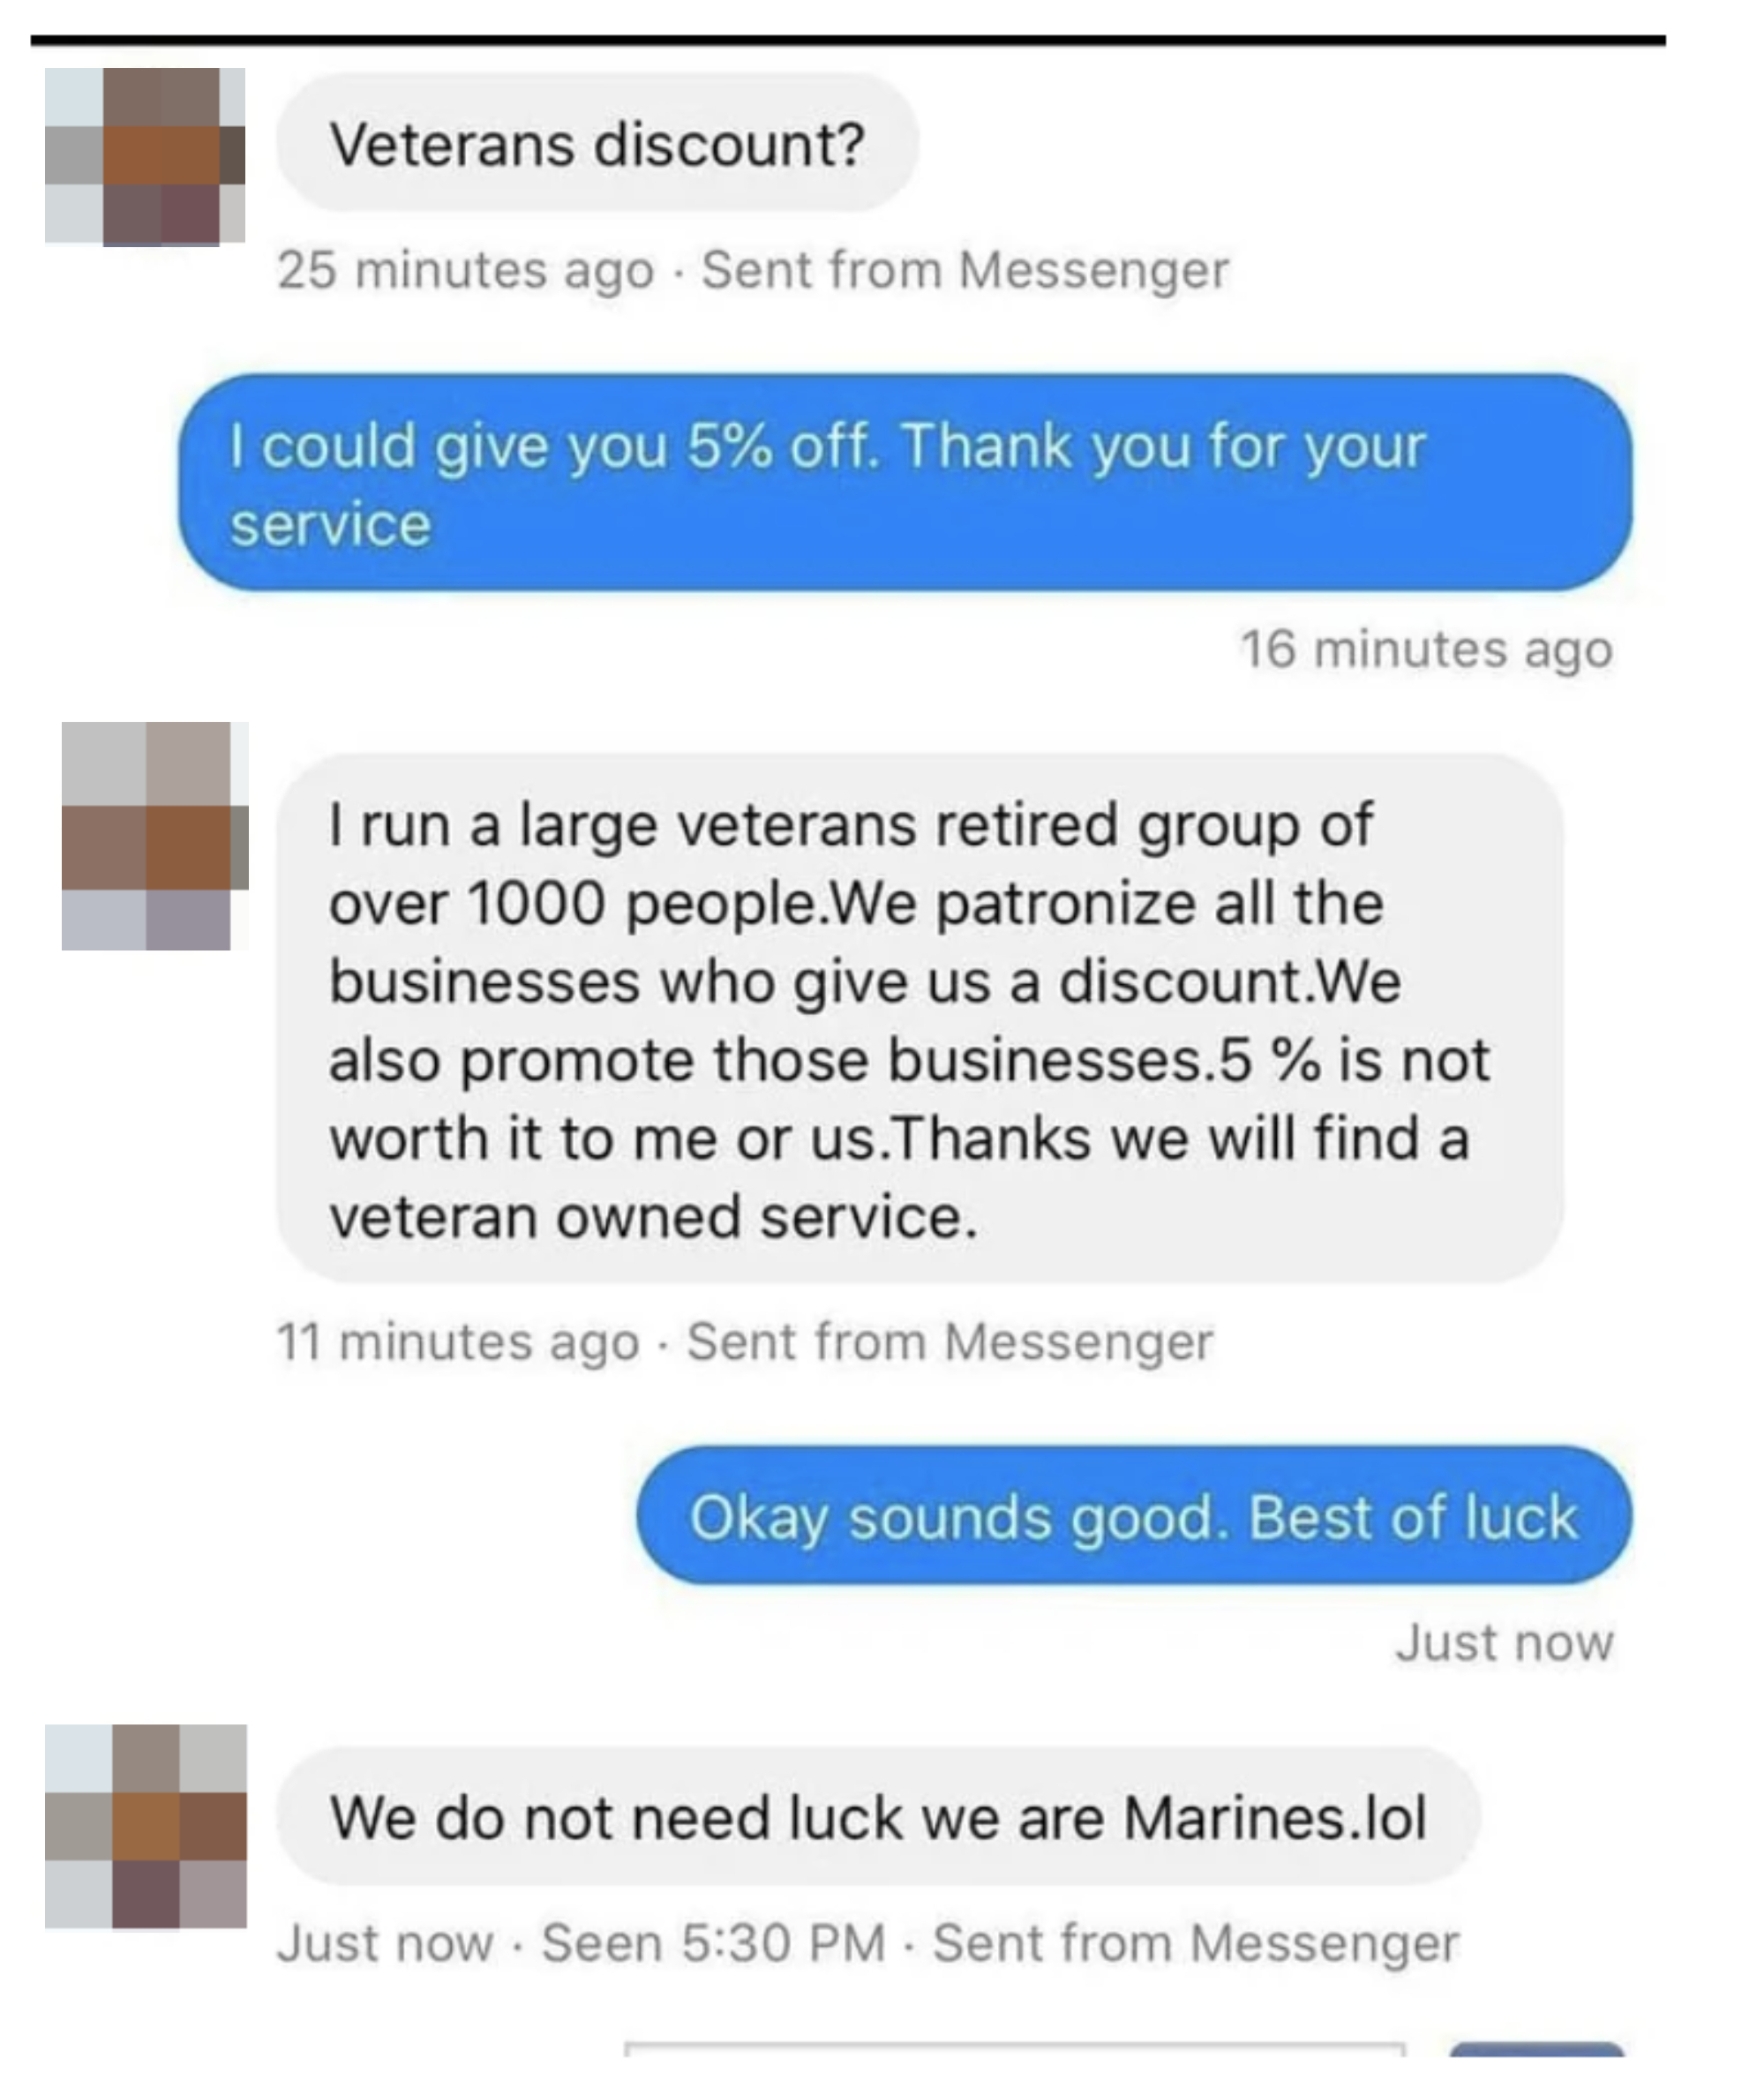 Screenshot of a text exchange where a veteran offers a 5% discount and another person expresses gratitude, citing Marine pride